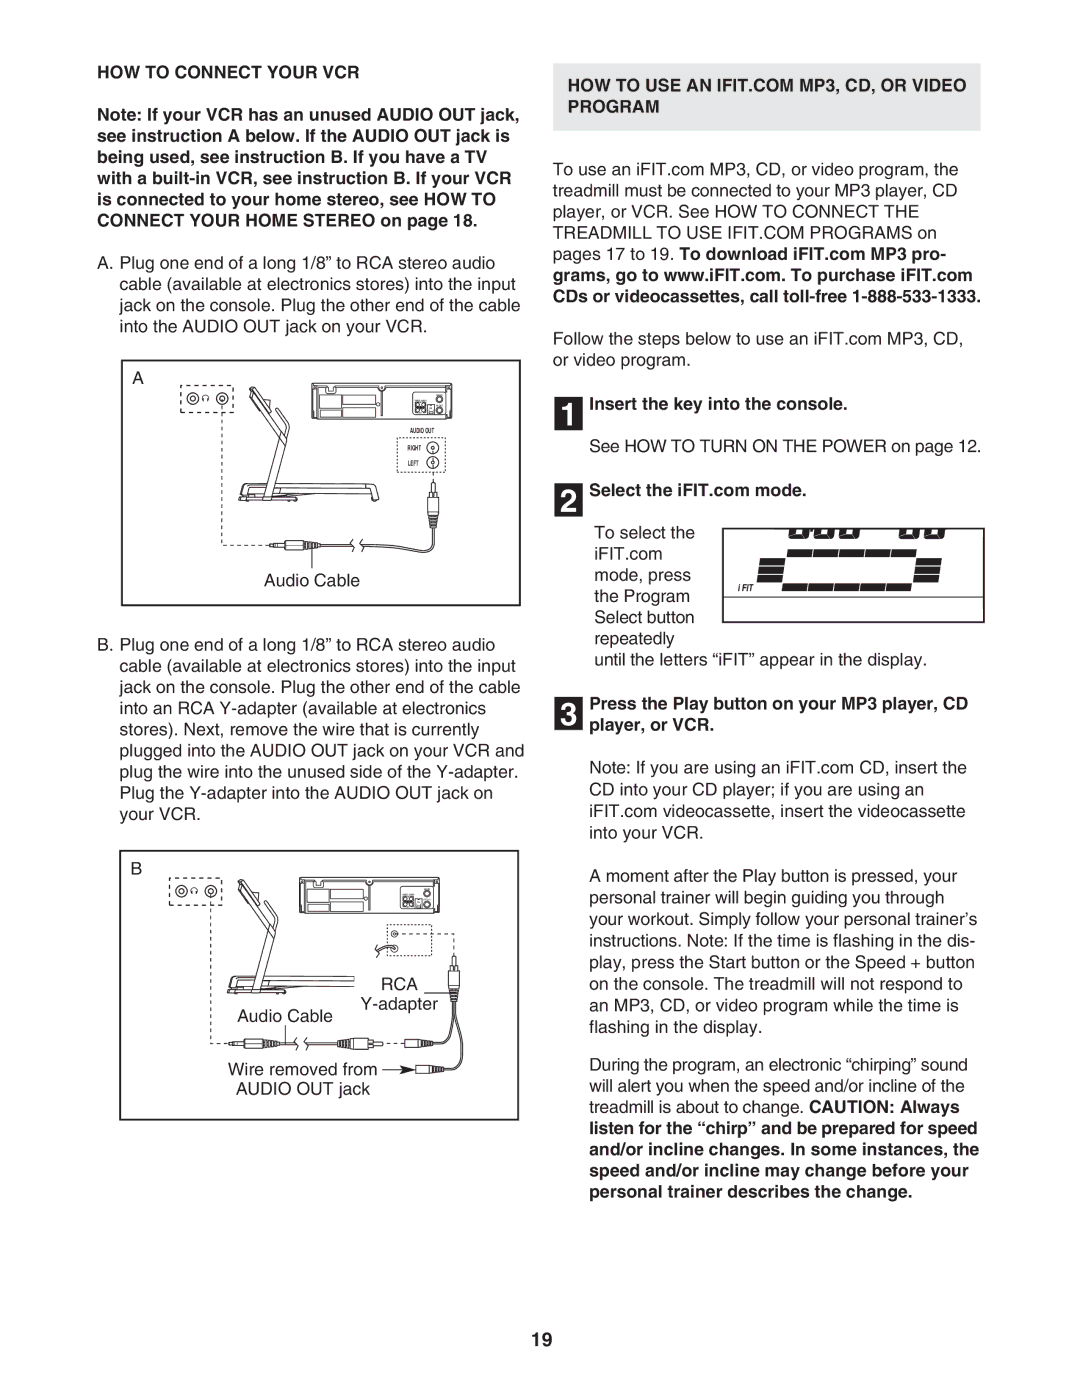 ProForm 831.295550 user manual HOW to Connect Your VCR, Press the Play button on your MP3 player, CD Player, or VCR 